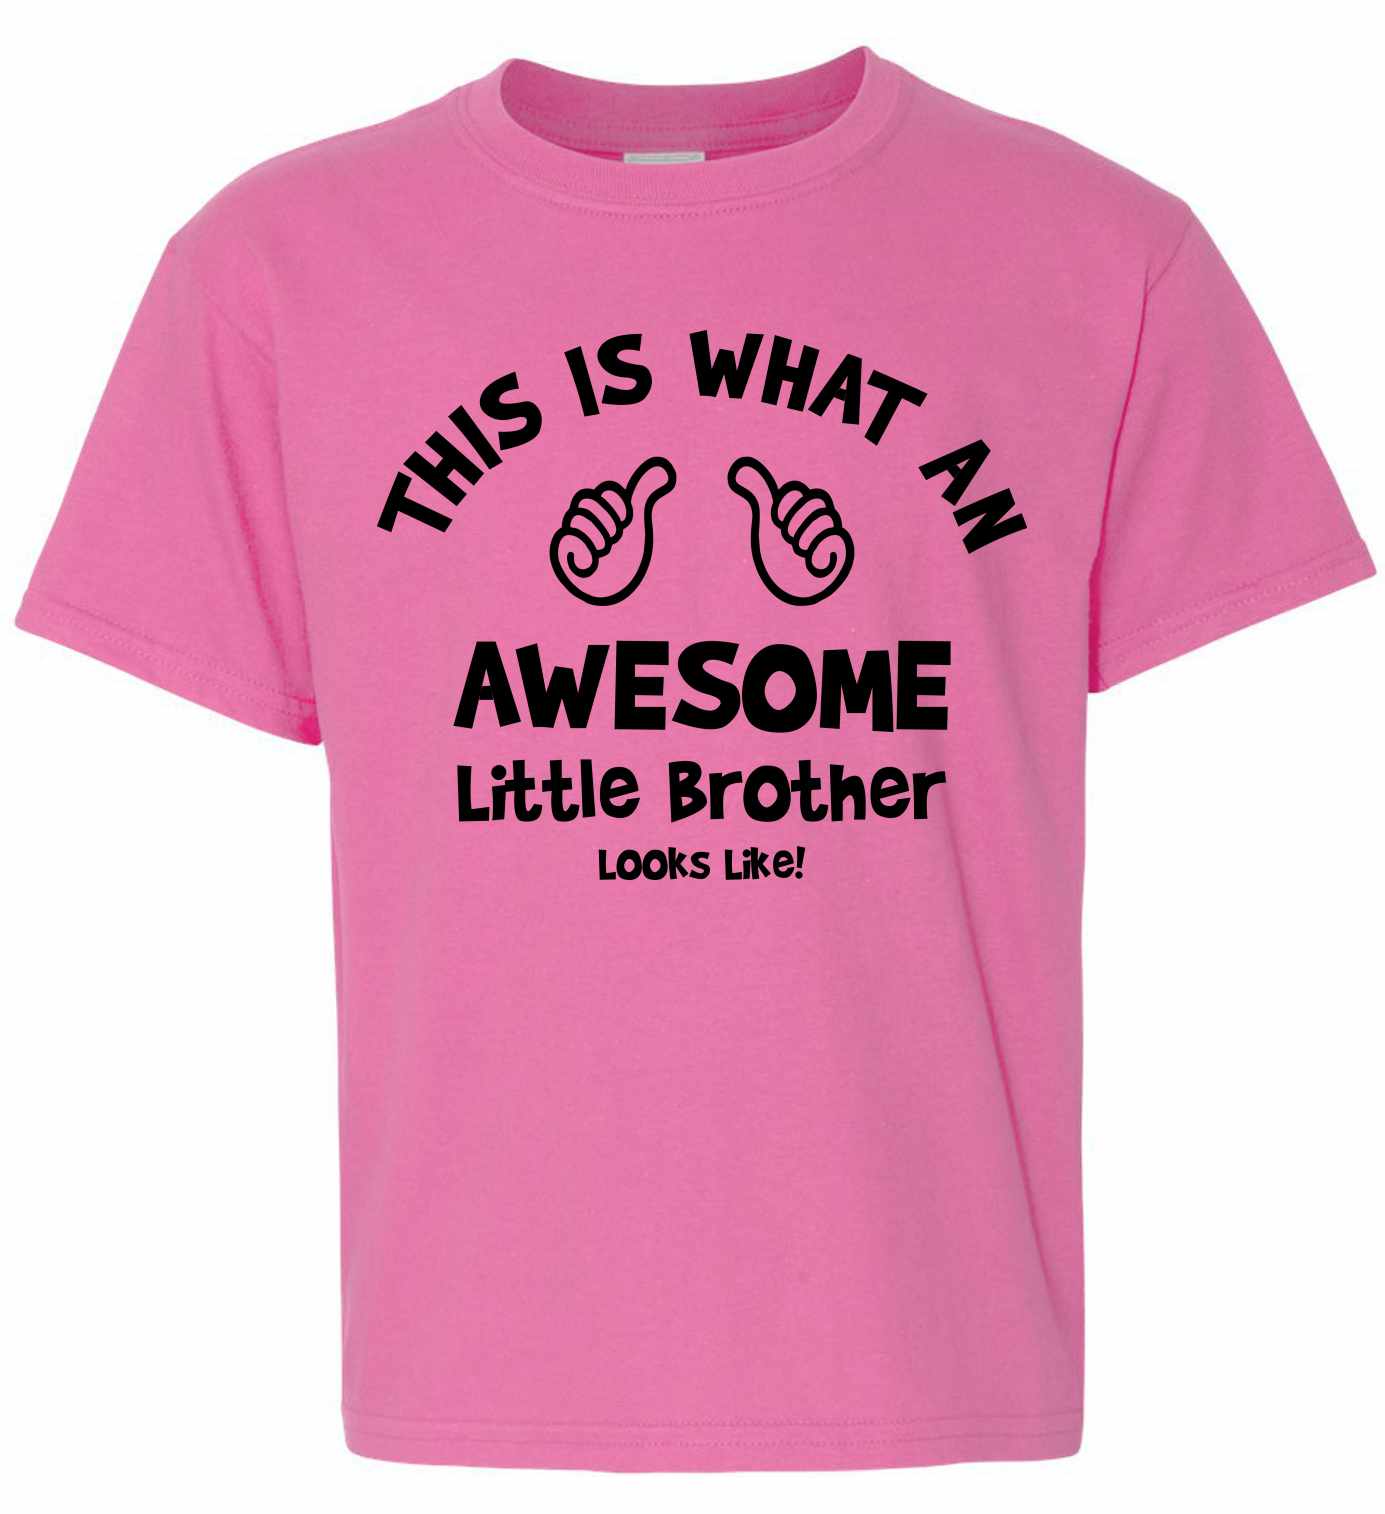 This is What an AWESOME LITTLE BROTHER Looks Like on Kids T-Shirt (#1036-201)